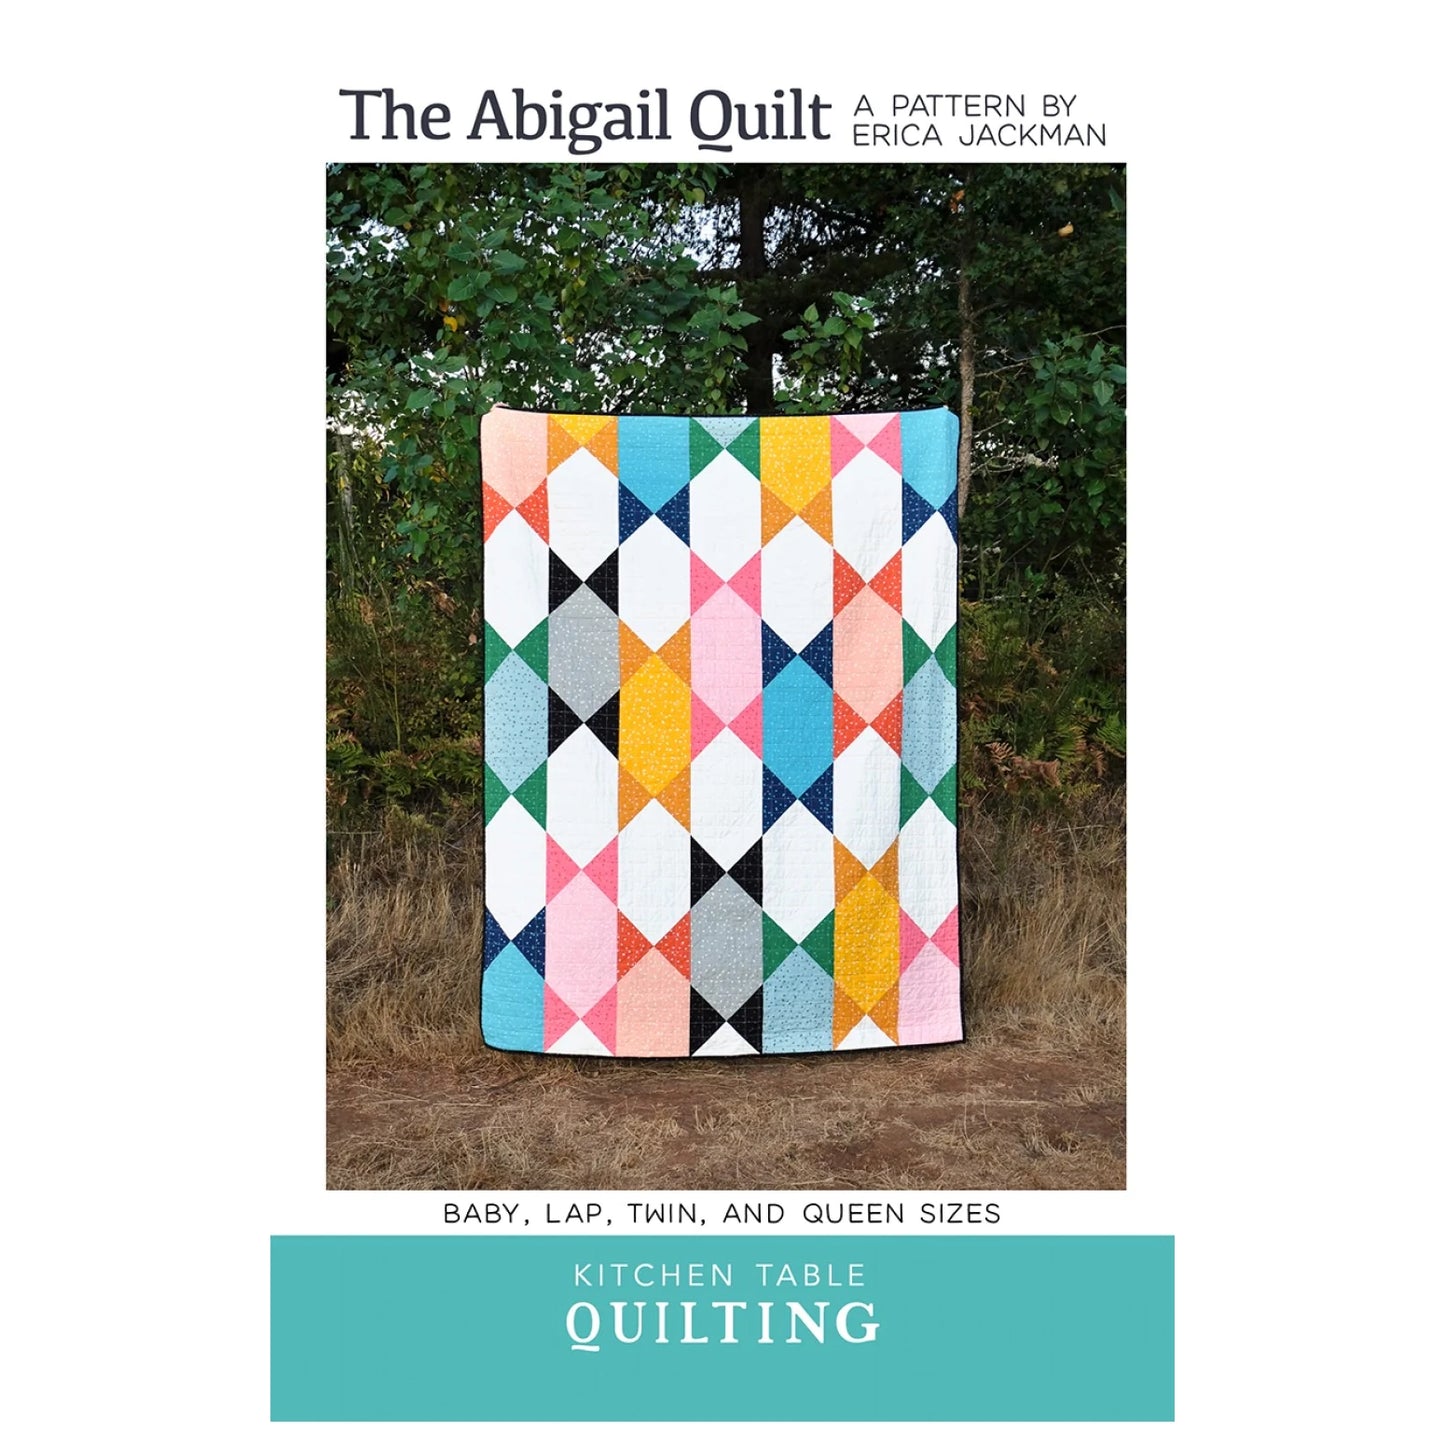 Kitchen Table Quilting - The Abigail Quilt Pattern